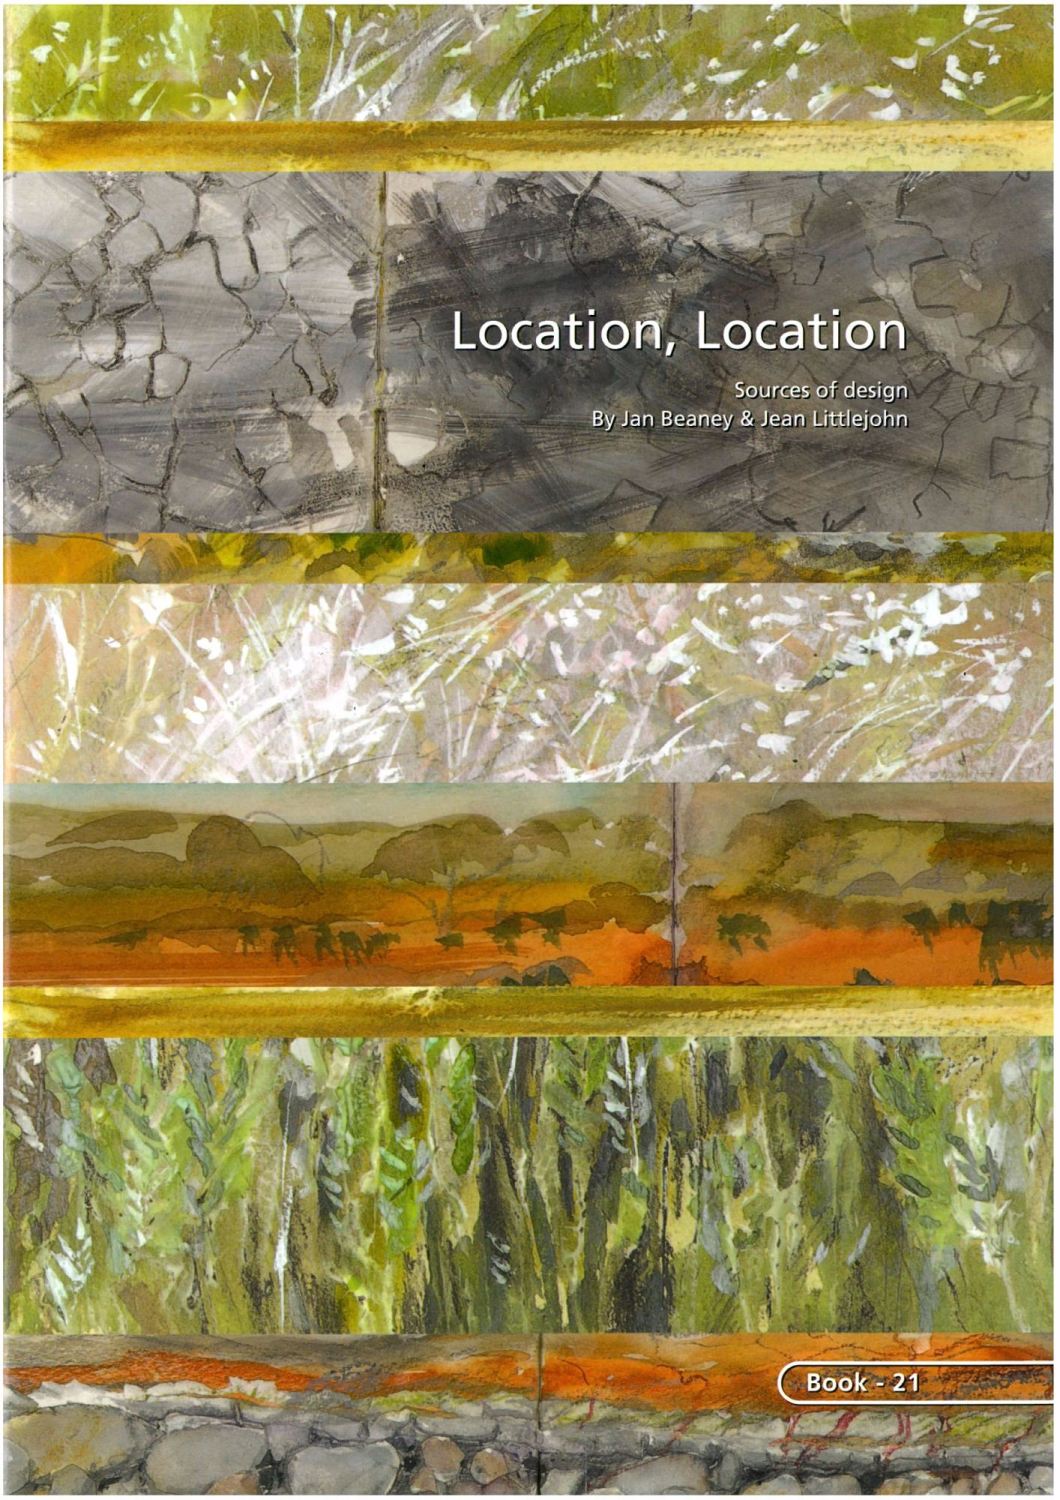 BOOK 21 – LOCATION, LOCATION. By Jan Beaney and Jean Littlejohn